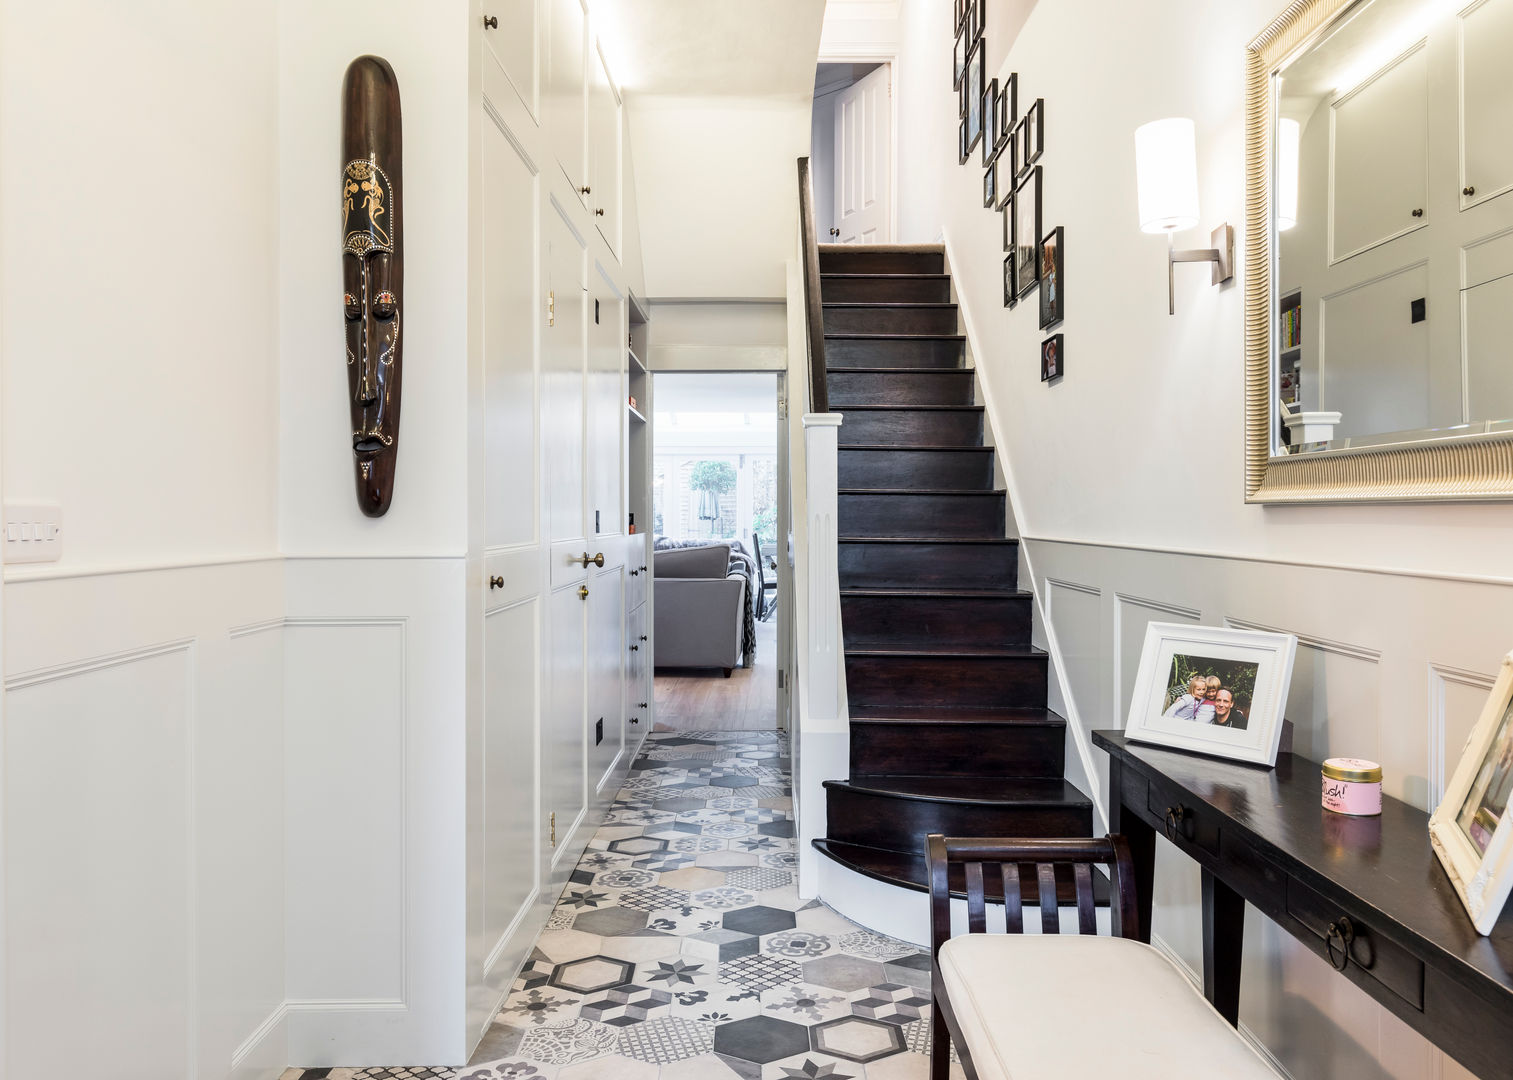 homify Modern Corridor, Hallway and Staircase